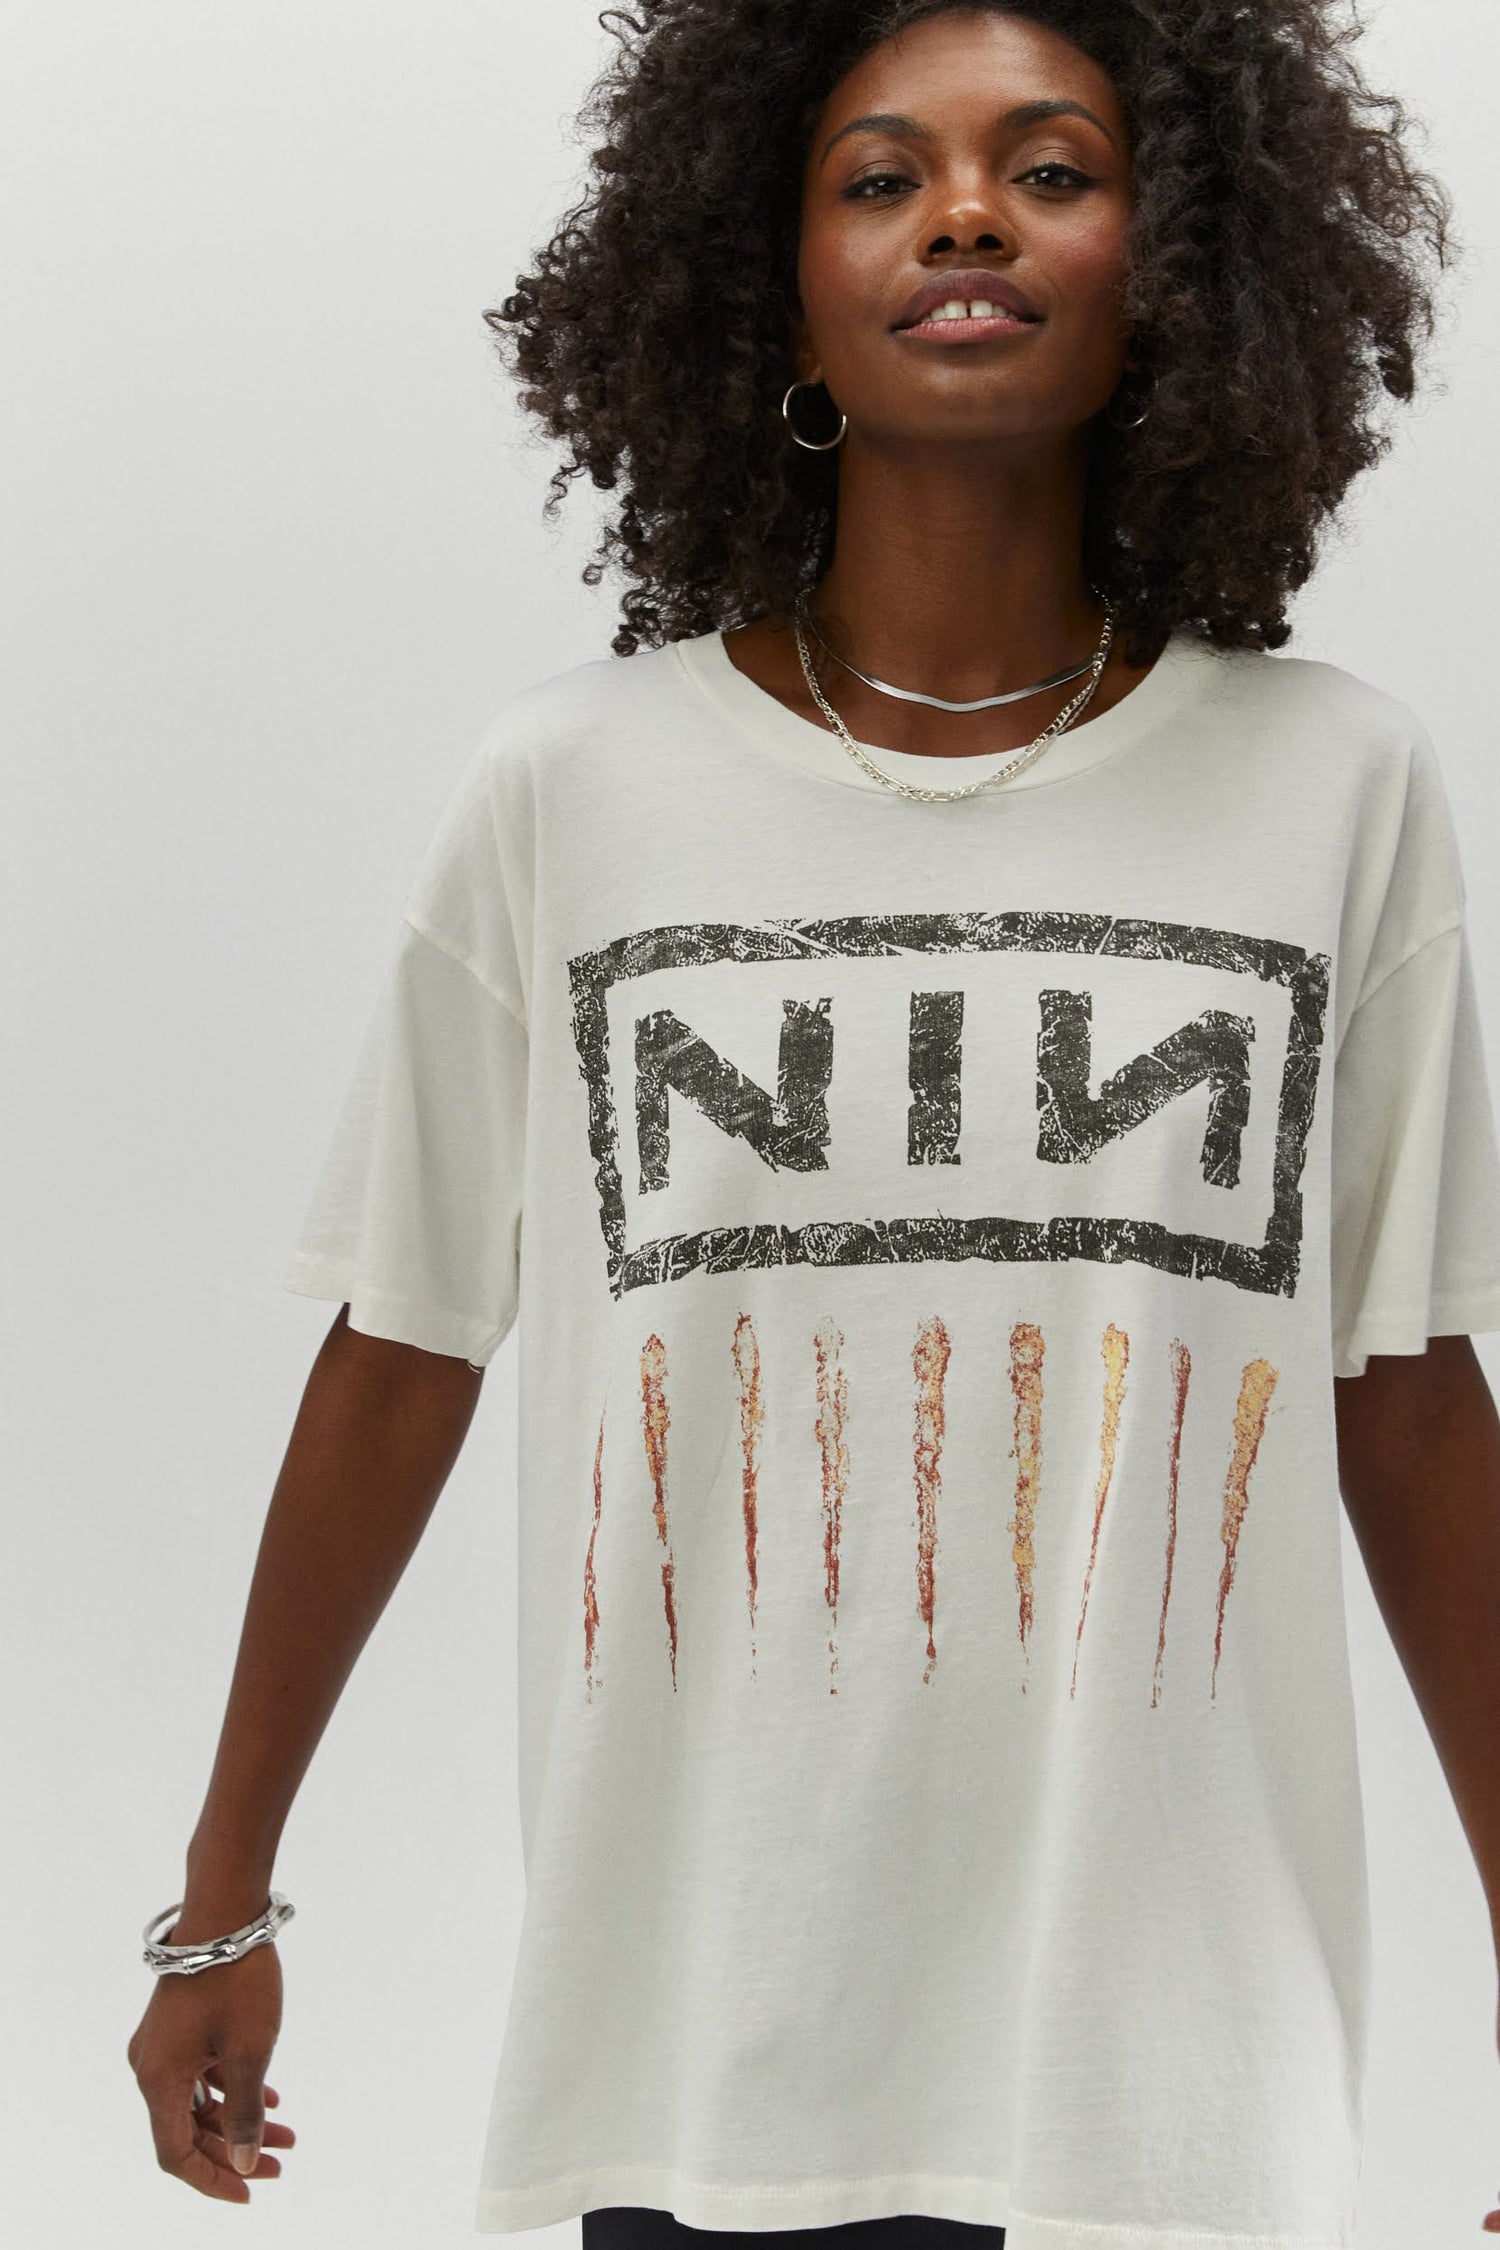 A dark curly-haired model featuring a white tee designed with their logo lands on this roomy merch tee with a tribute to one of the most important albums of the 90s,